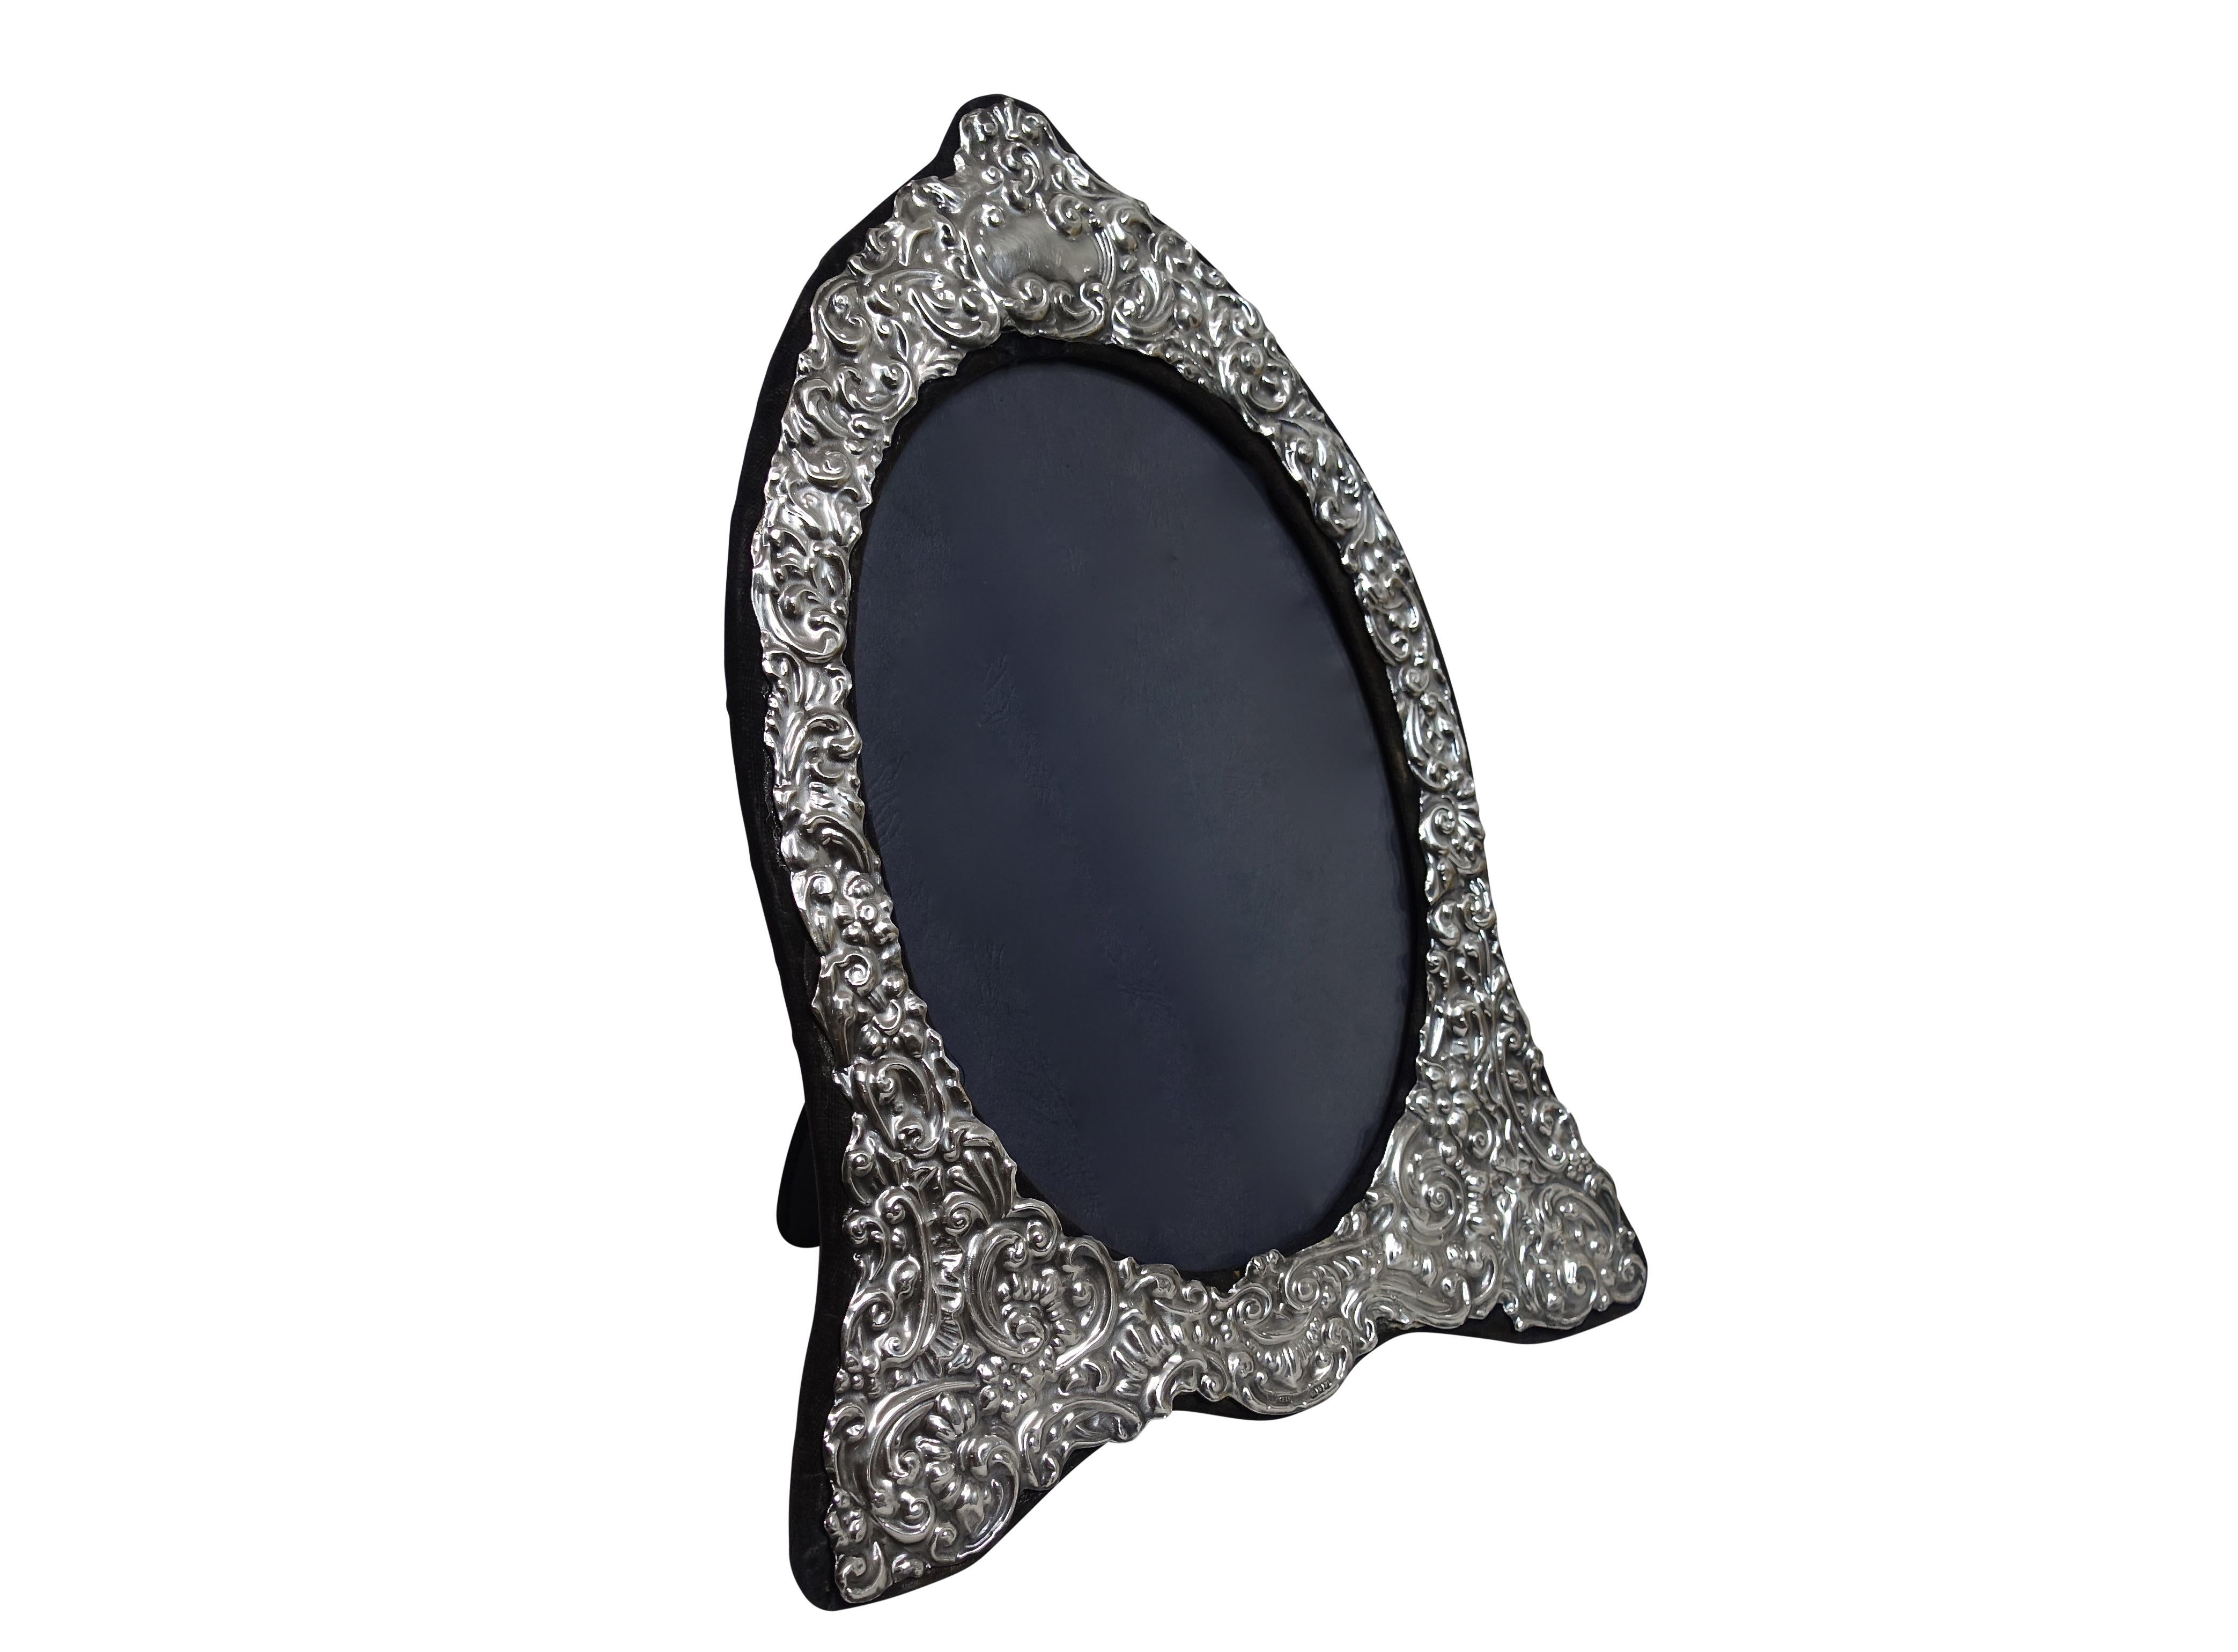 A large repousse sterling silver tabletop picture frame with blue velvet easel back. Fully hallmarked along the bottom edge, London England and made by the Key Ford Frames LTD.
The inner sight of this frame measures 8.5 inches high x 6 inches wide.